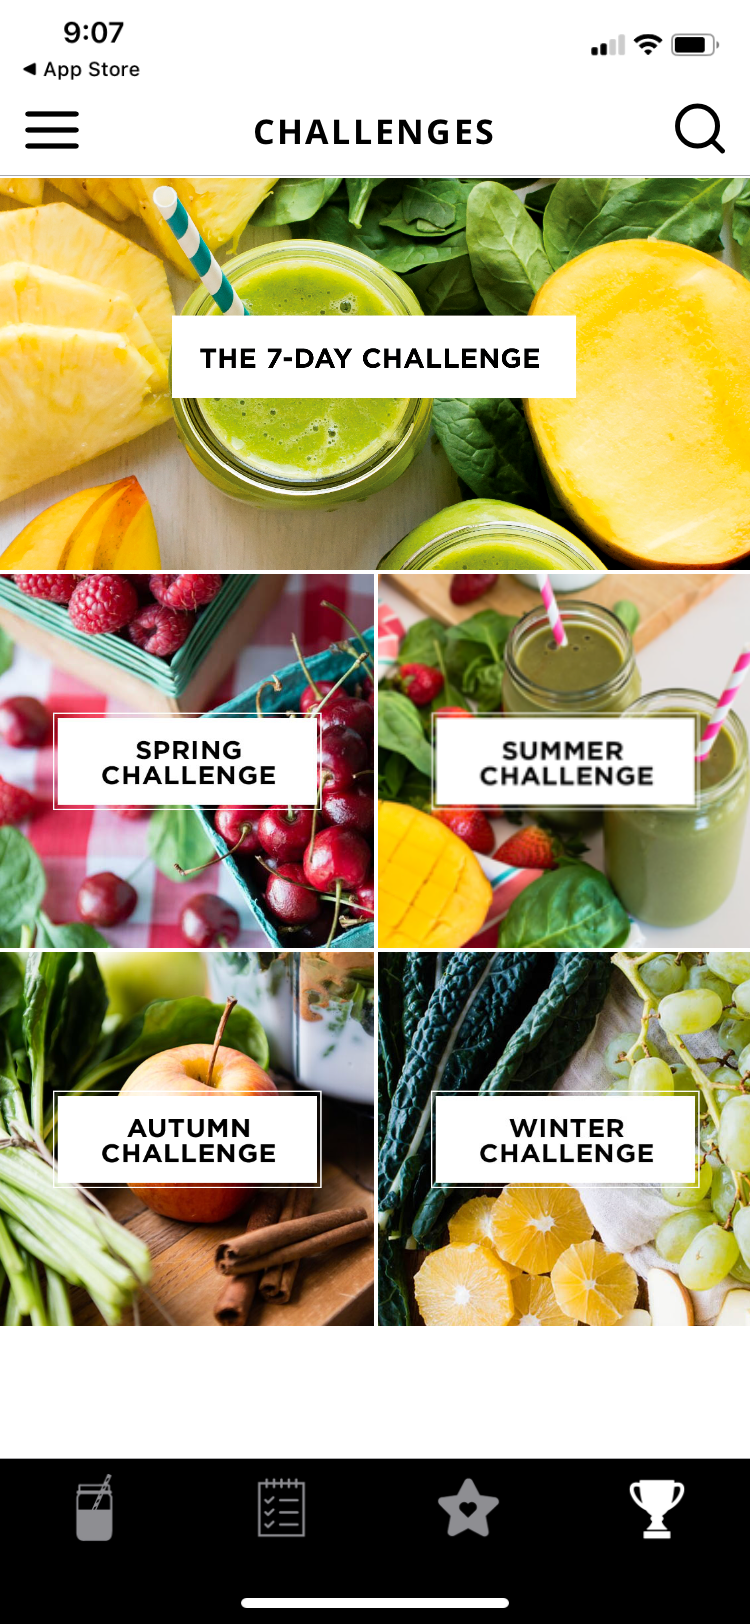 Daily Blends app challenges screen